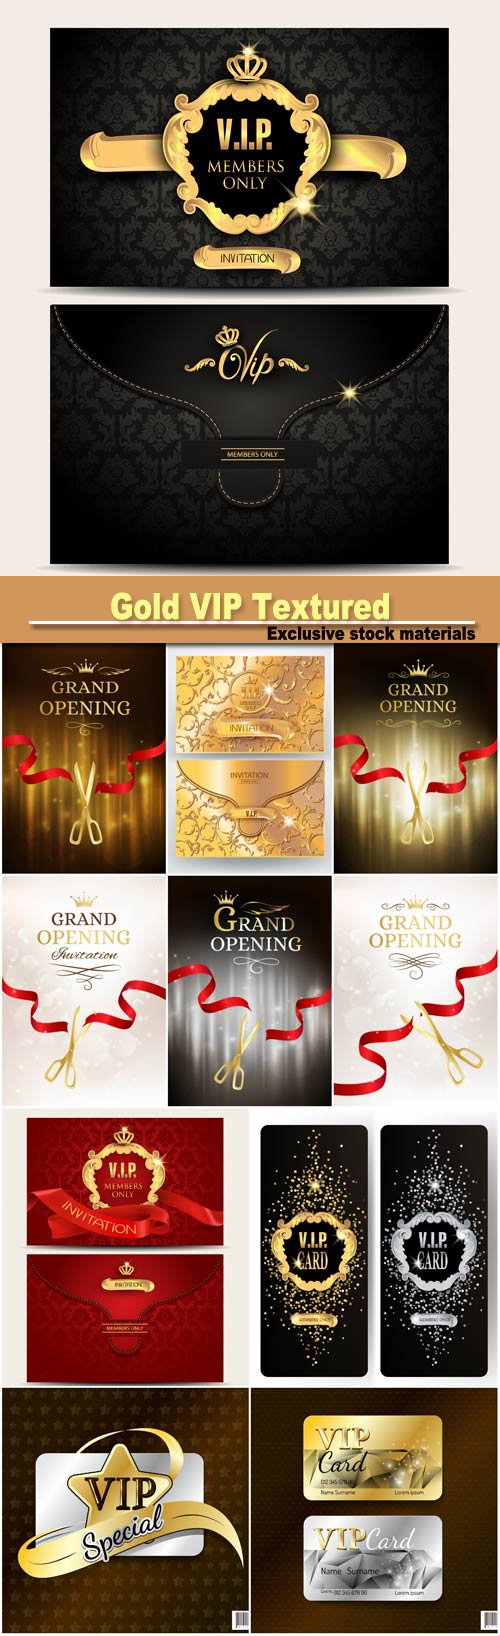 Gold VIP textured envelope with floral background and gold vintage frame, grand opening banner